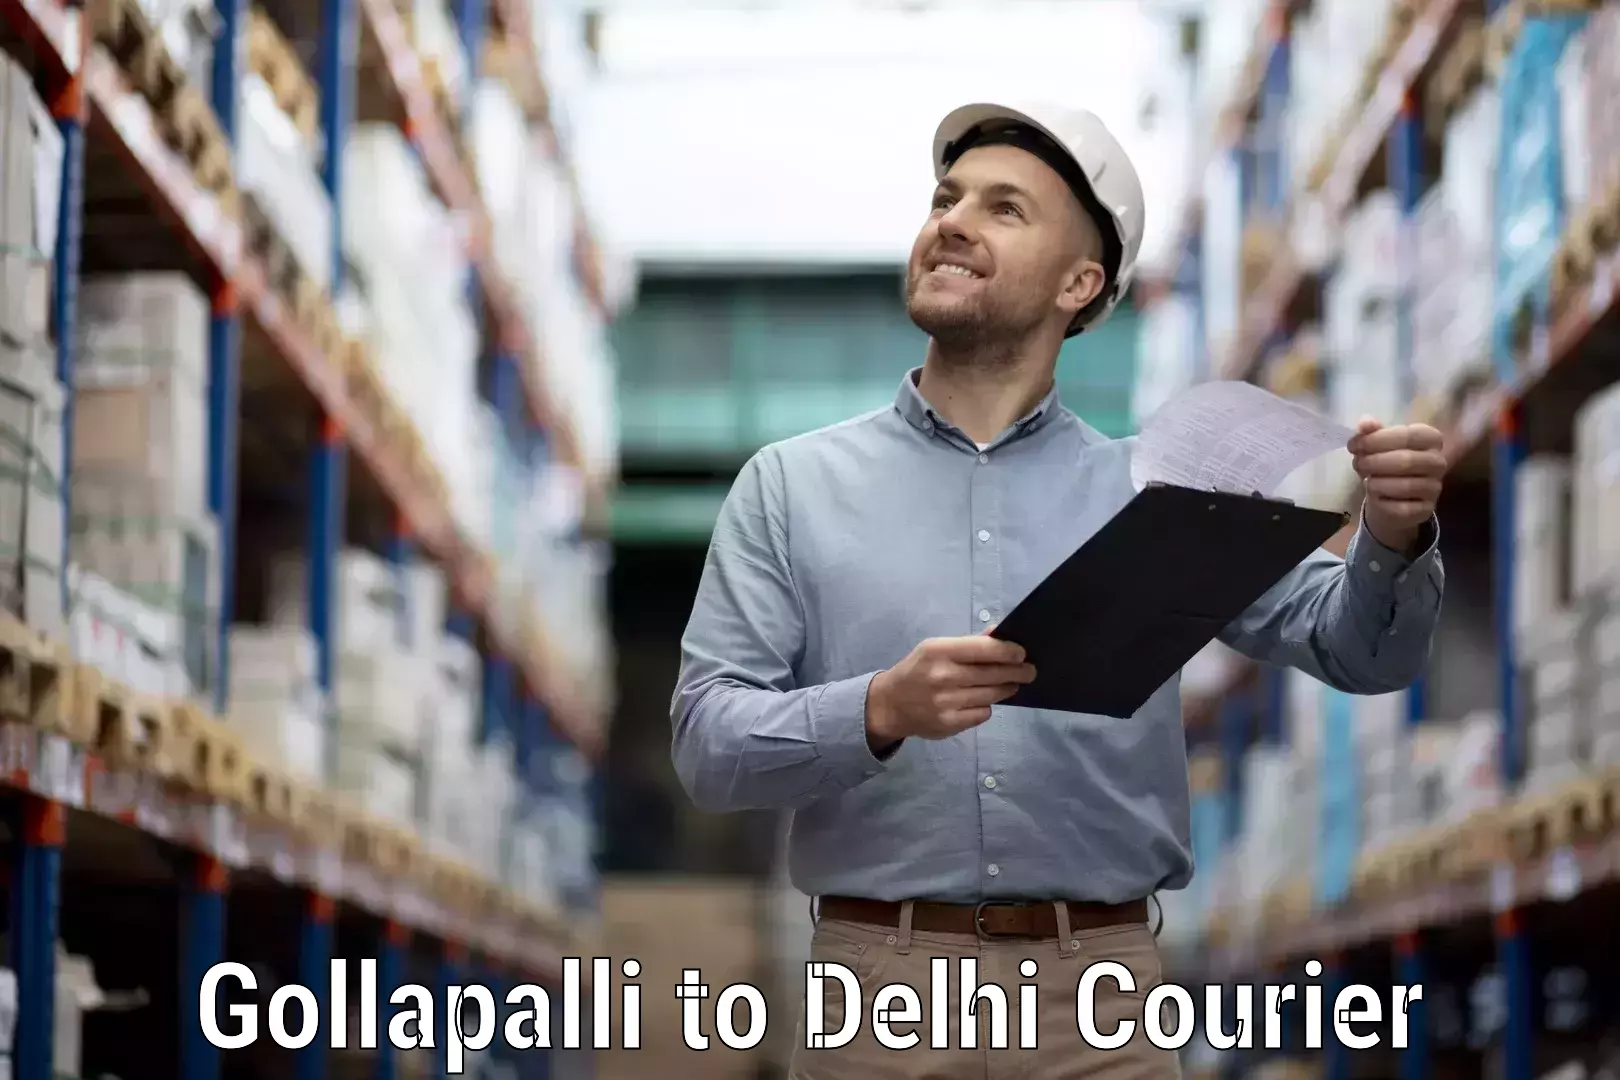 Global courier networks Gollapalli to Subhash Nagar